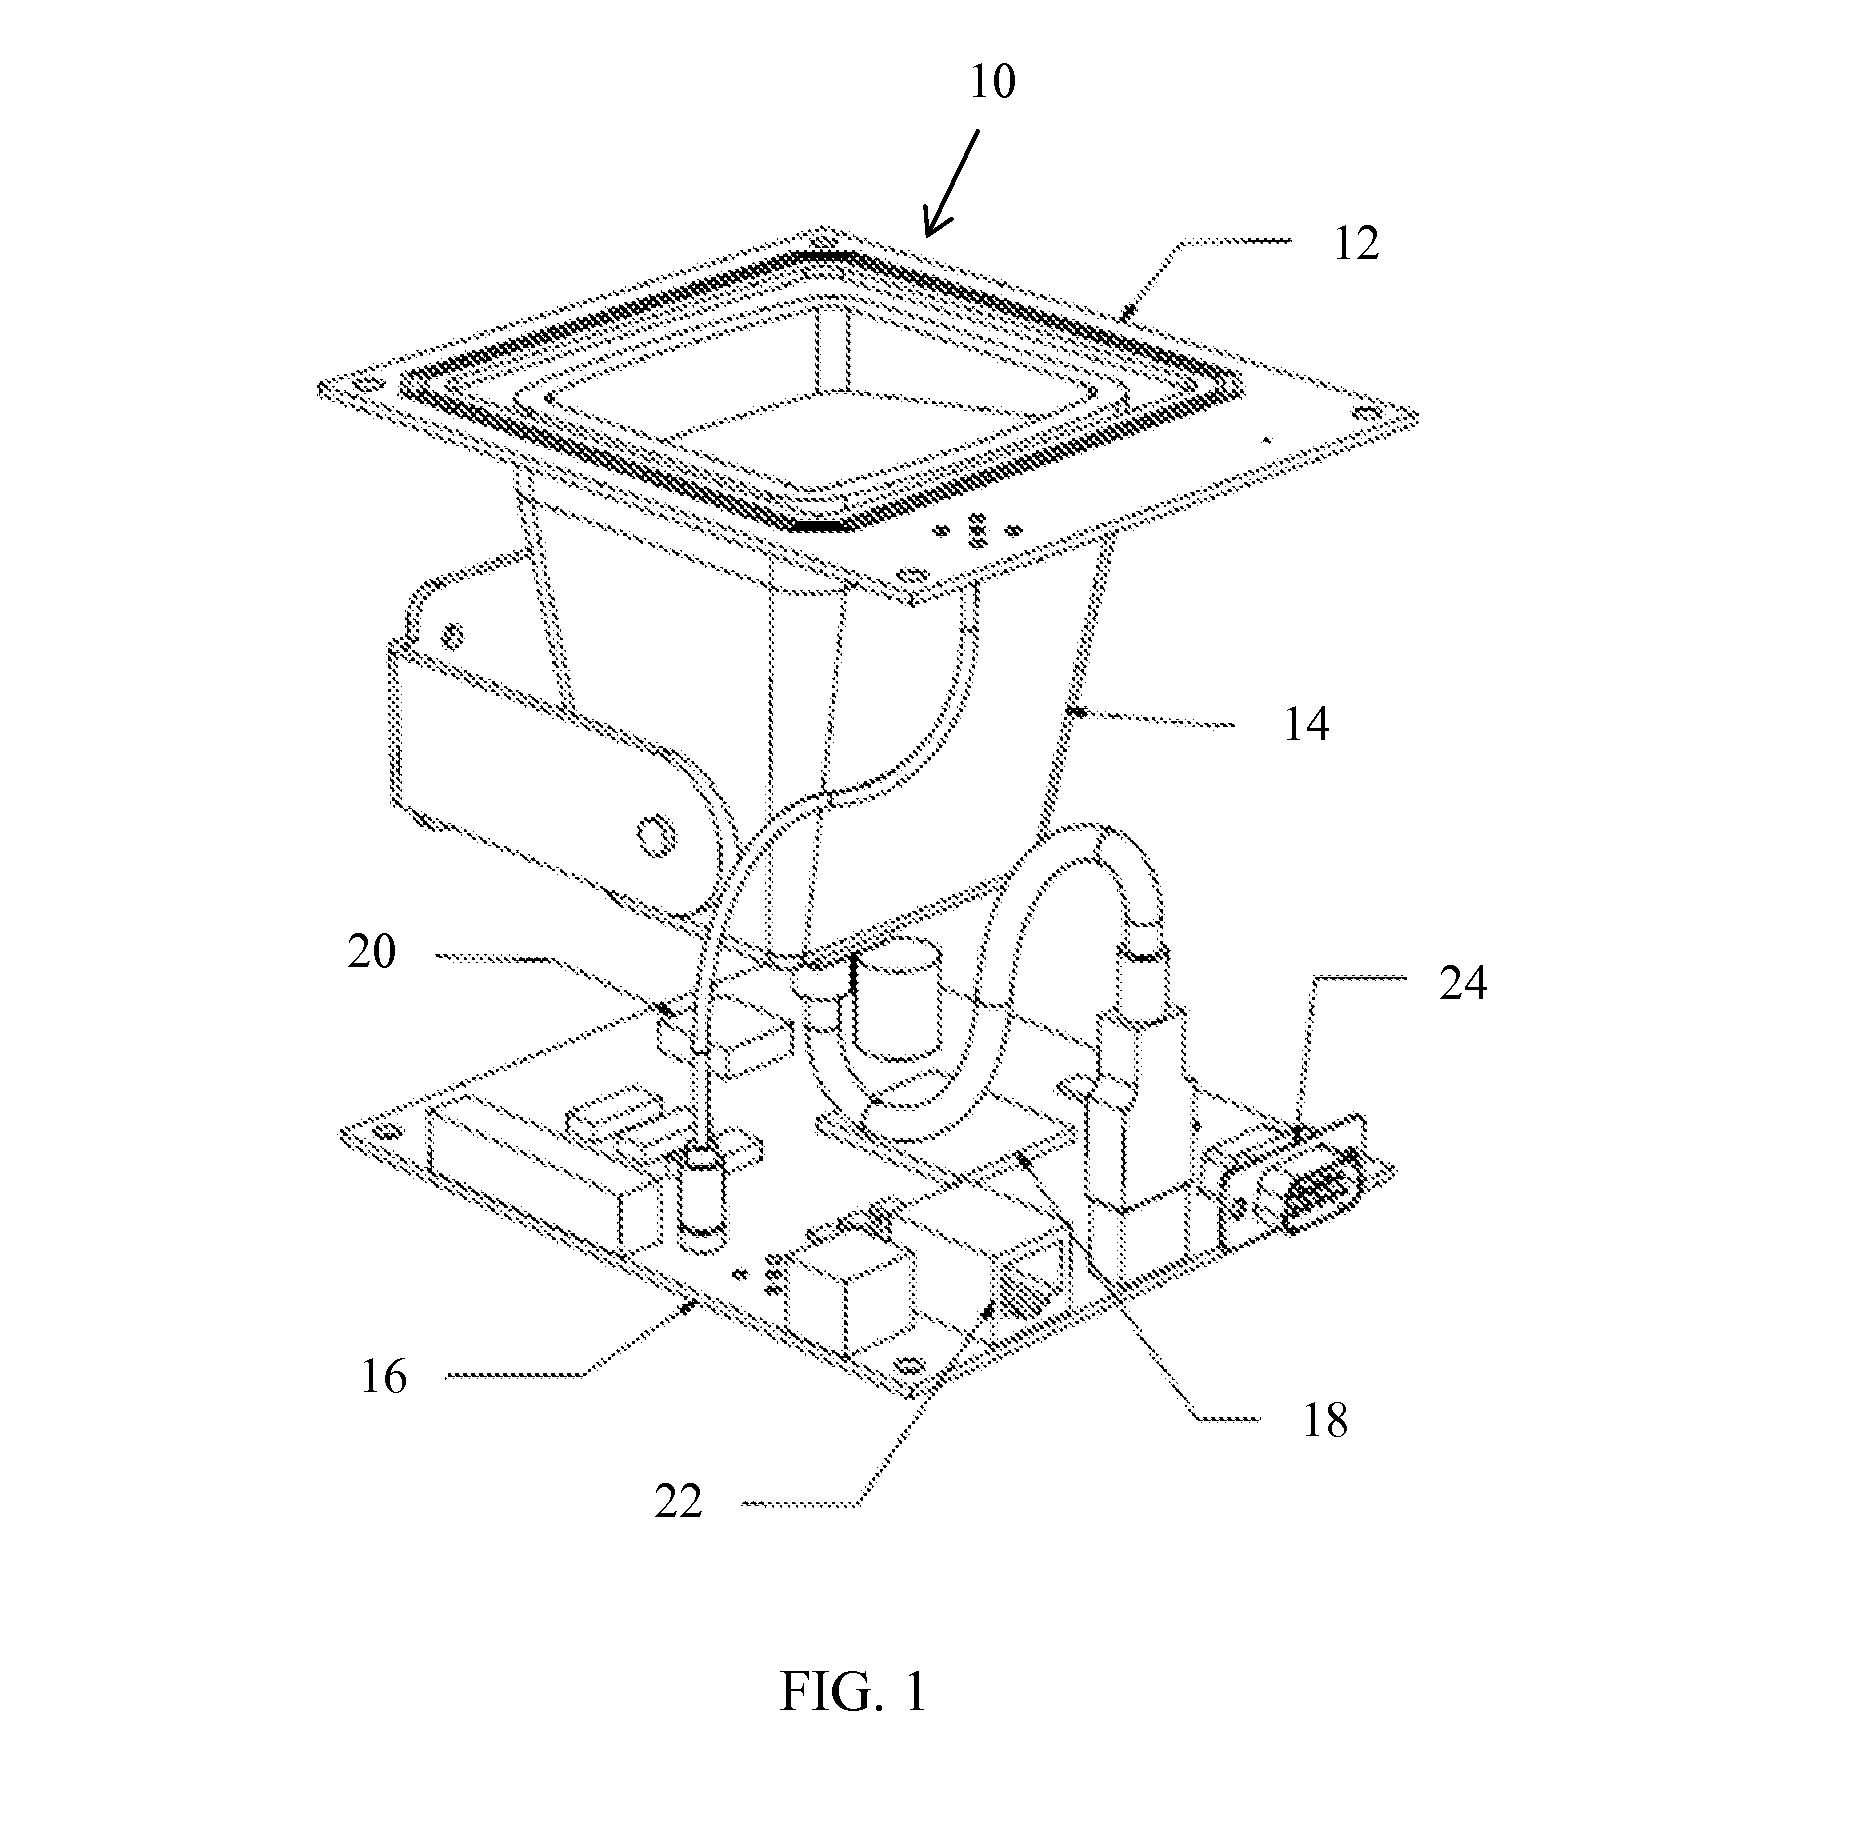 System and method for using a hybrid single-pass electronic ticket